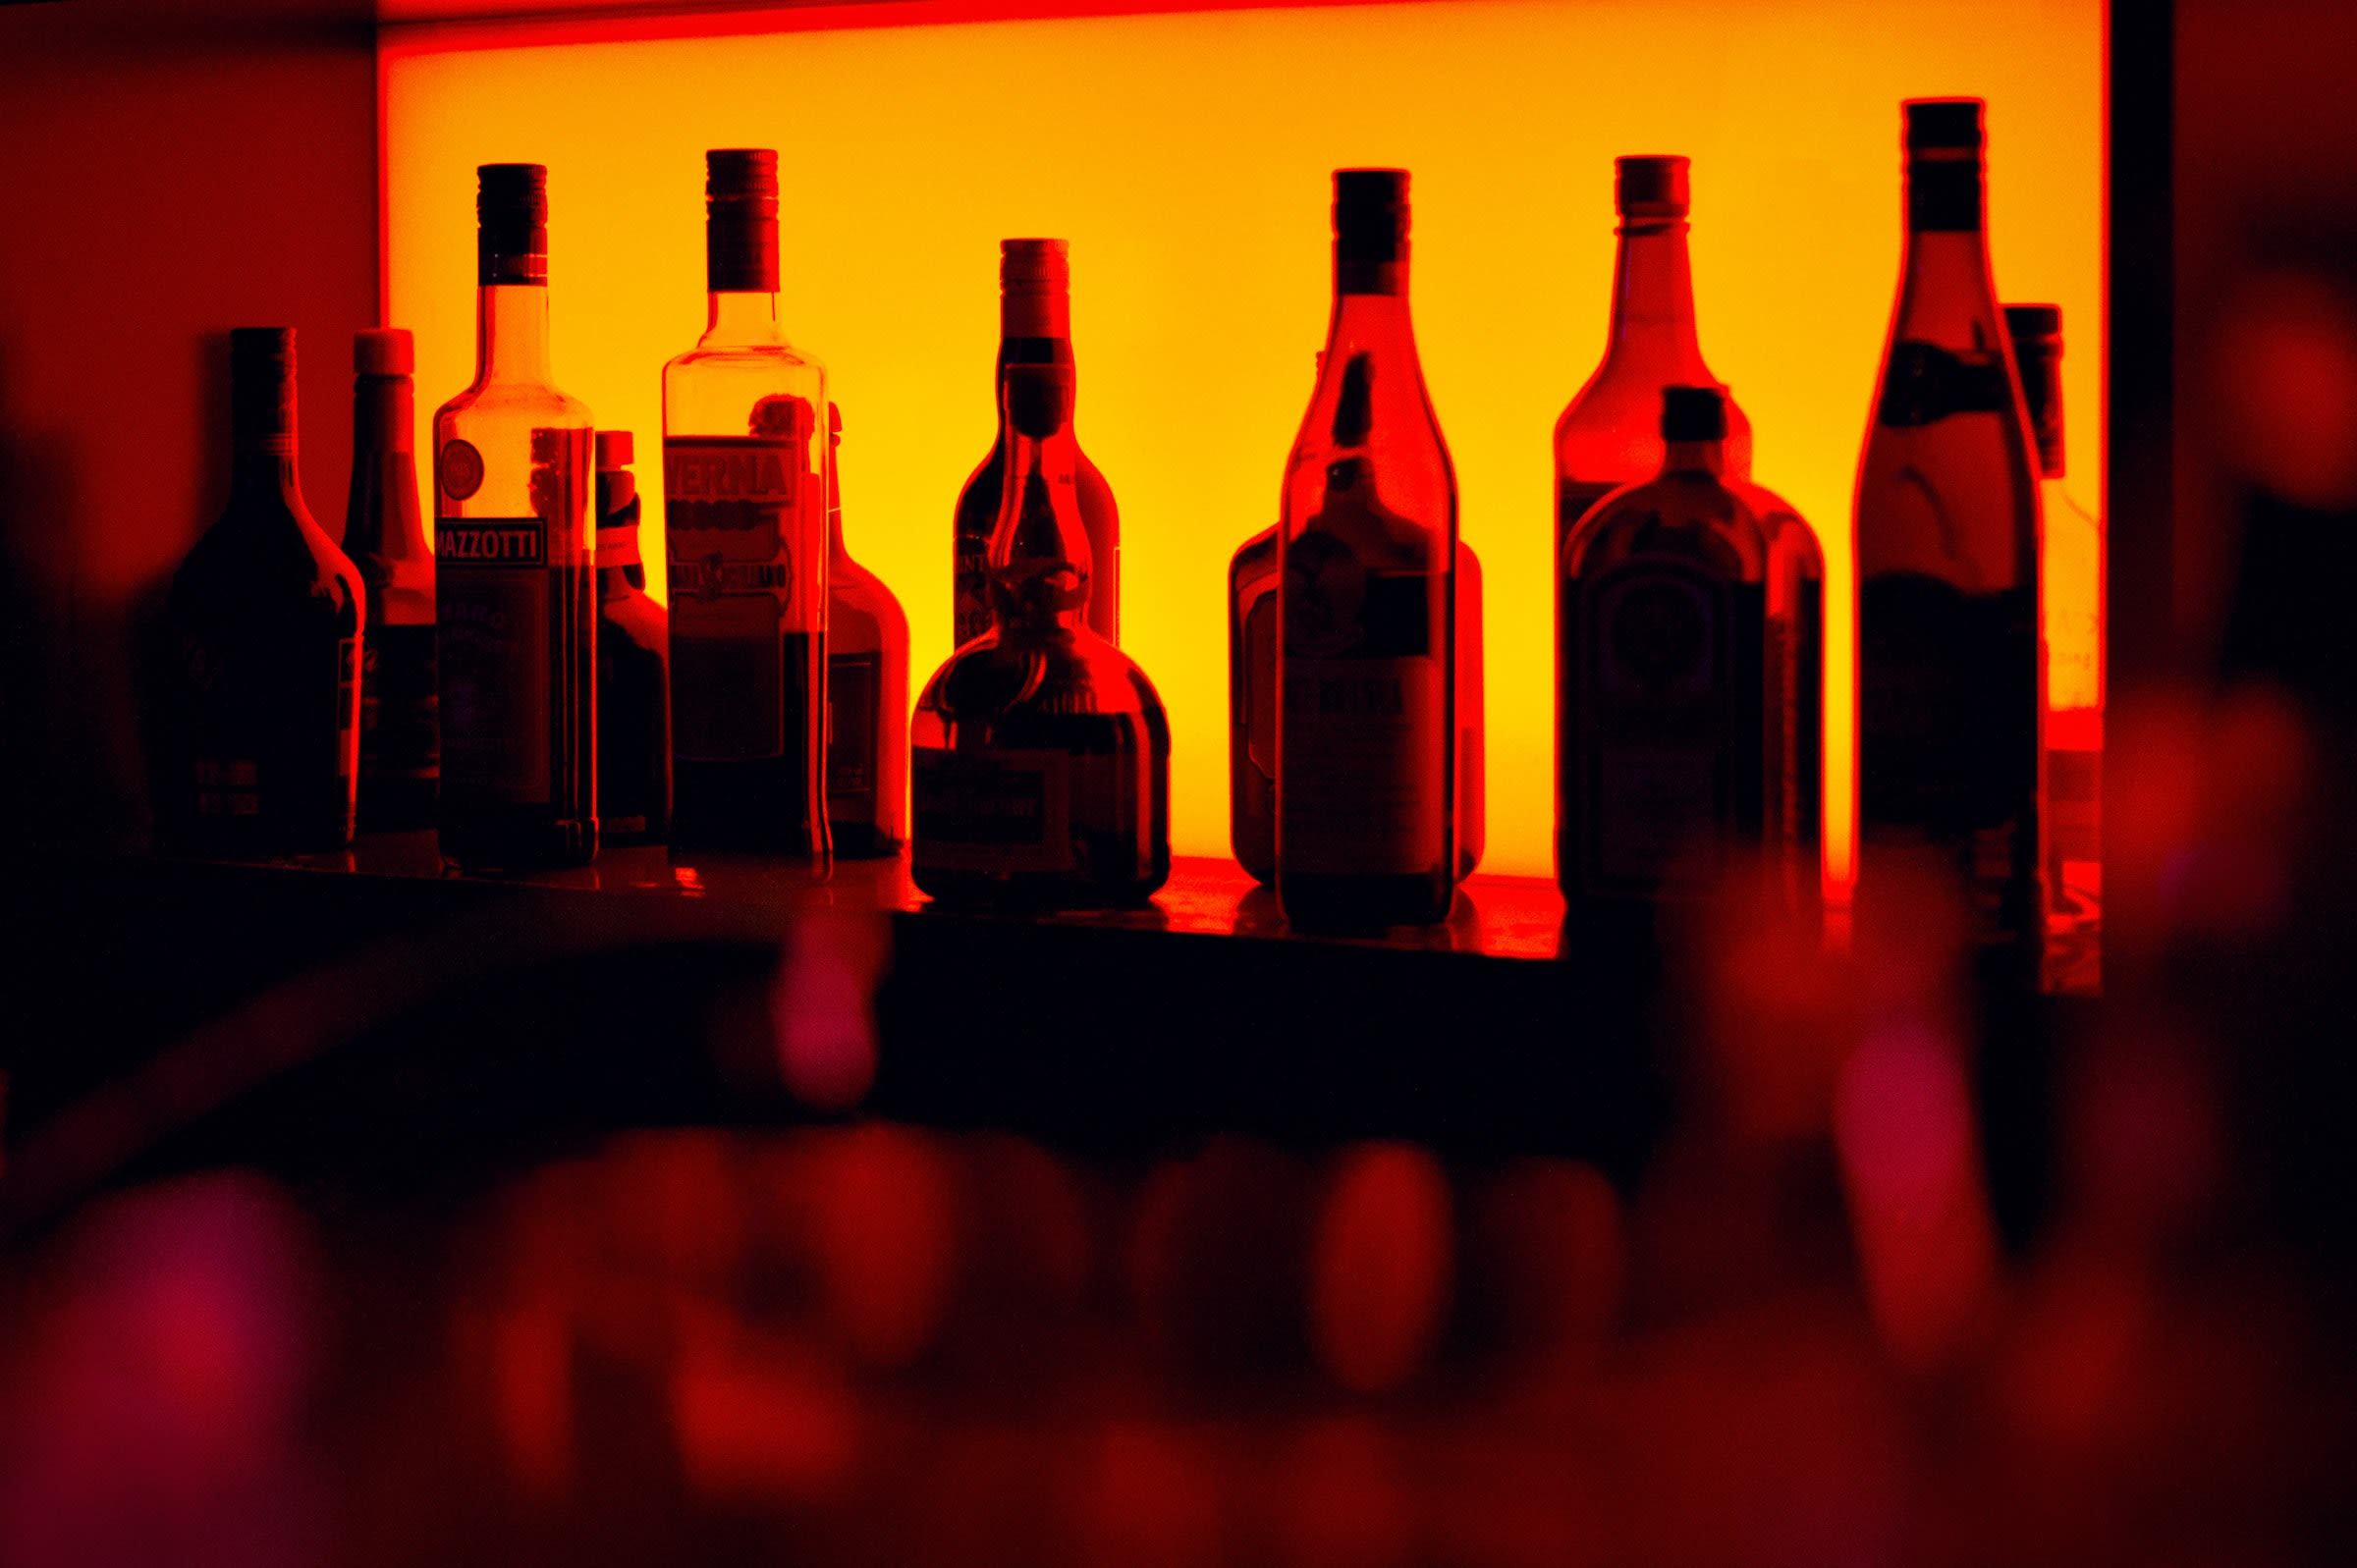 Photo of bottles lined up behind a bar